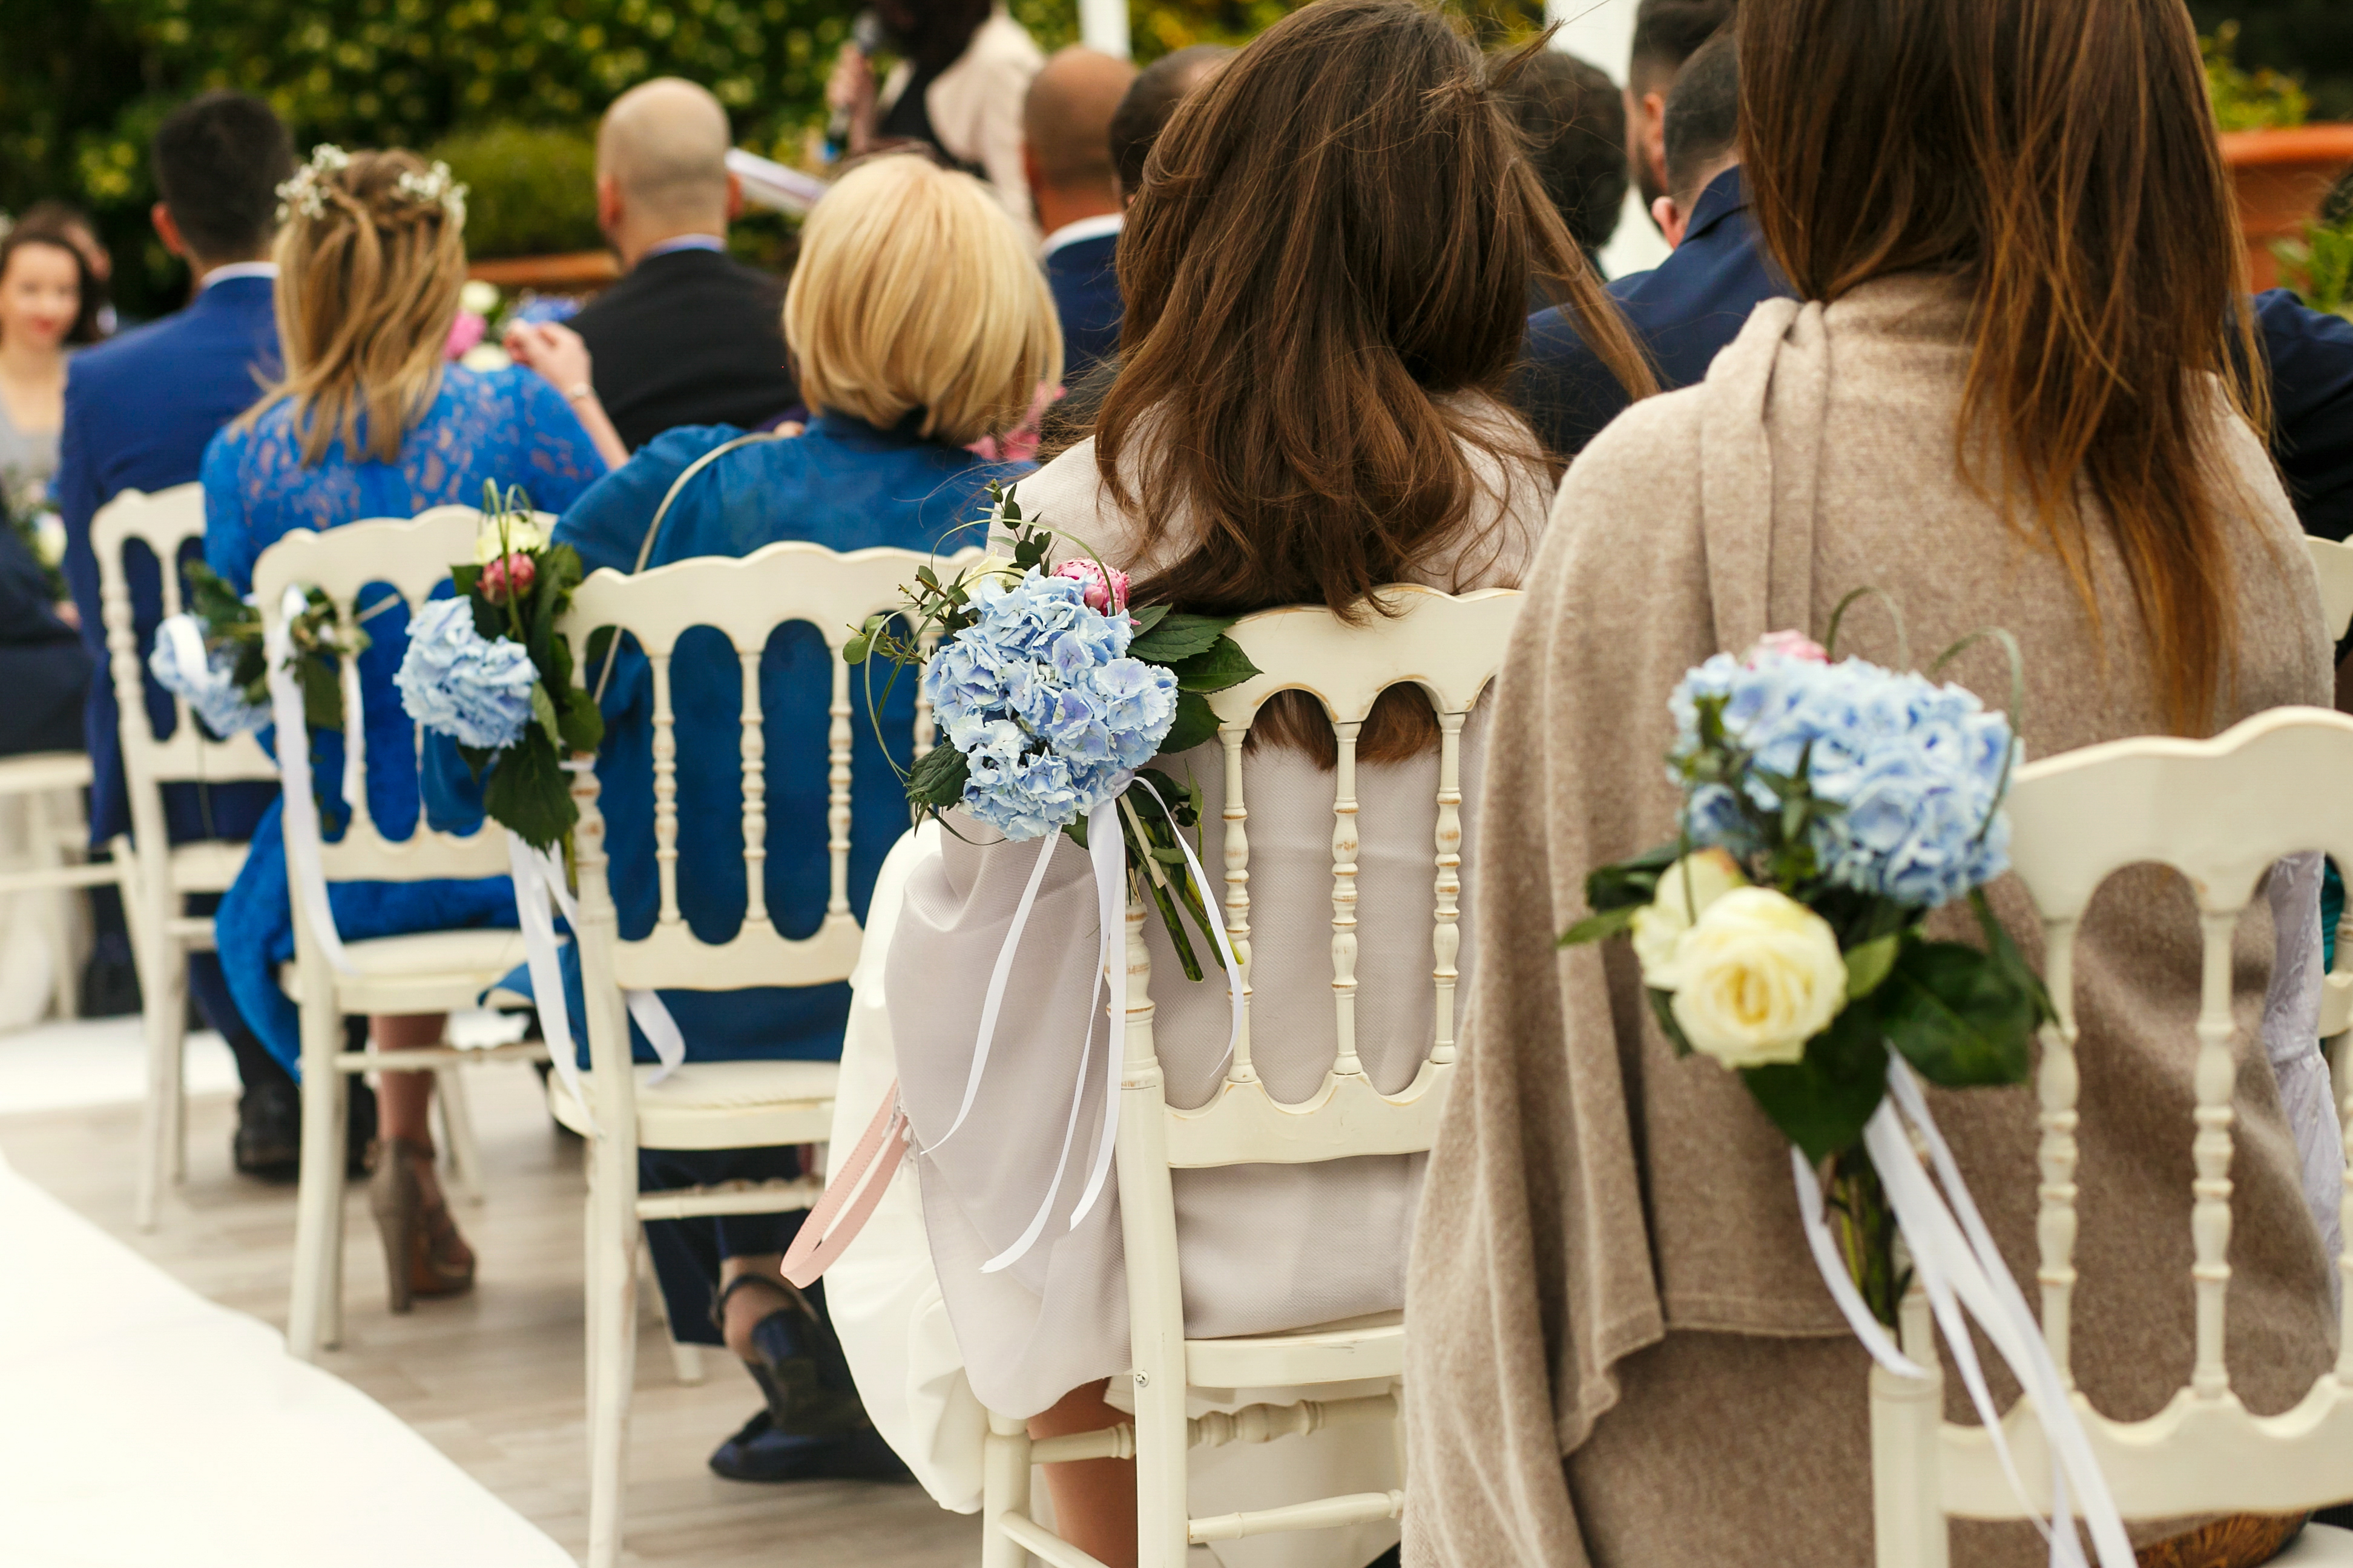 Guests sitting on chairs during a wedding ceremony | Source: Shutterstock